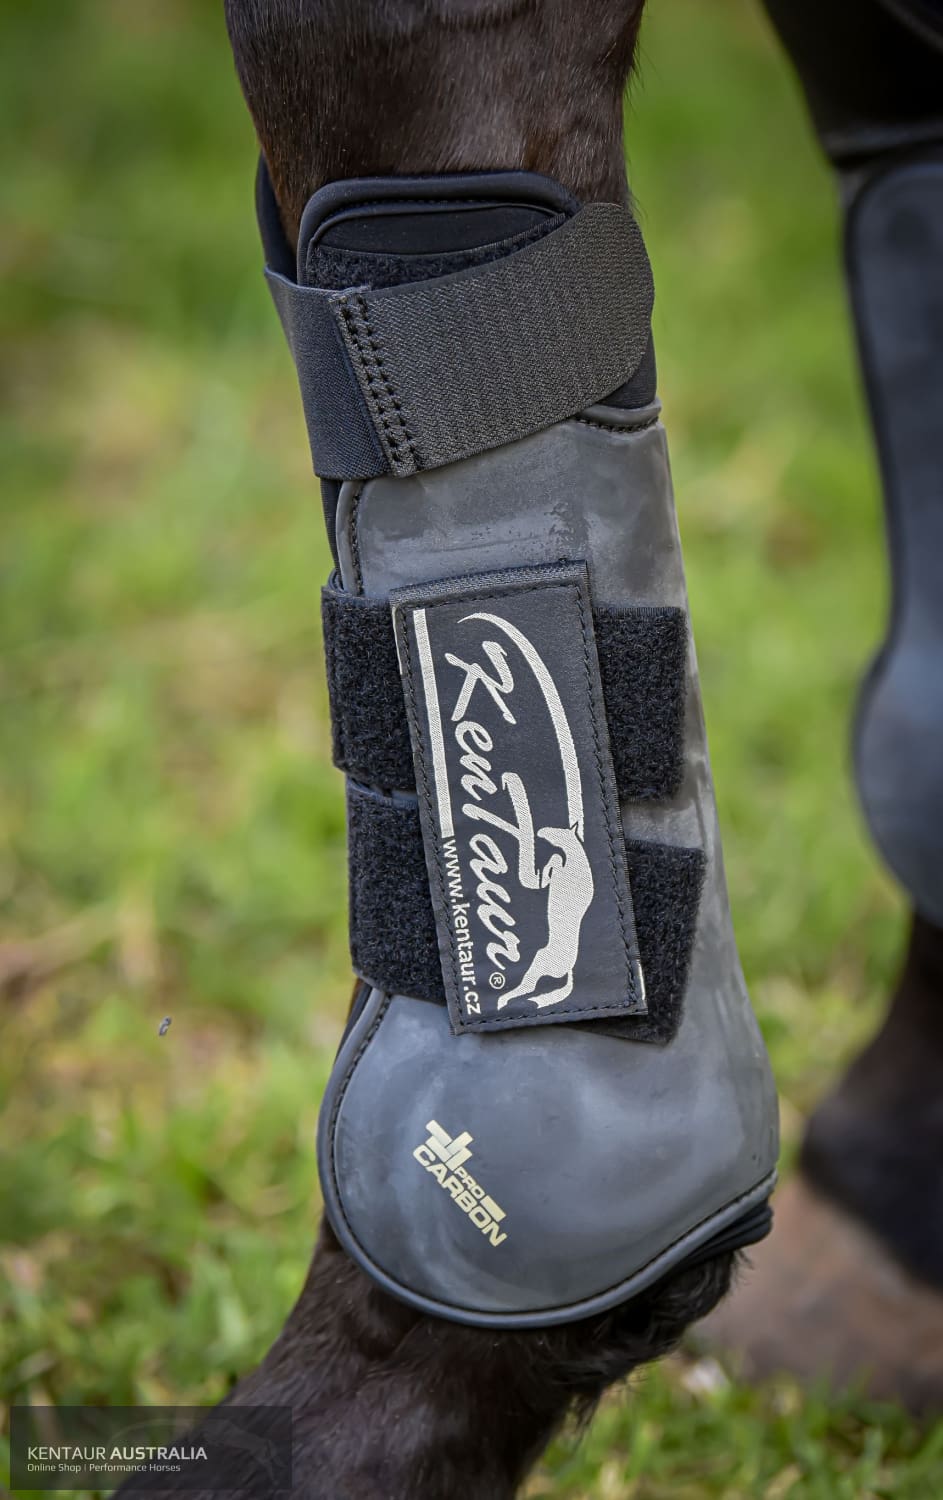 Kentaur ’Pro Carbon’ Front Jumping Boots with Knee Protection Jumping Boots